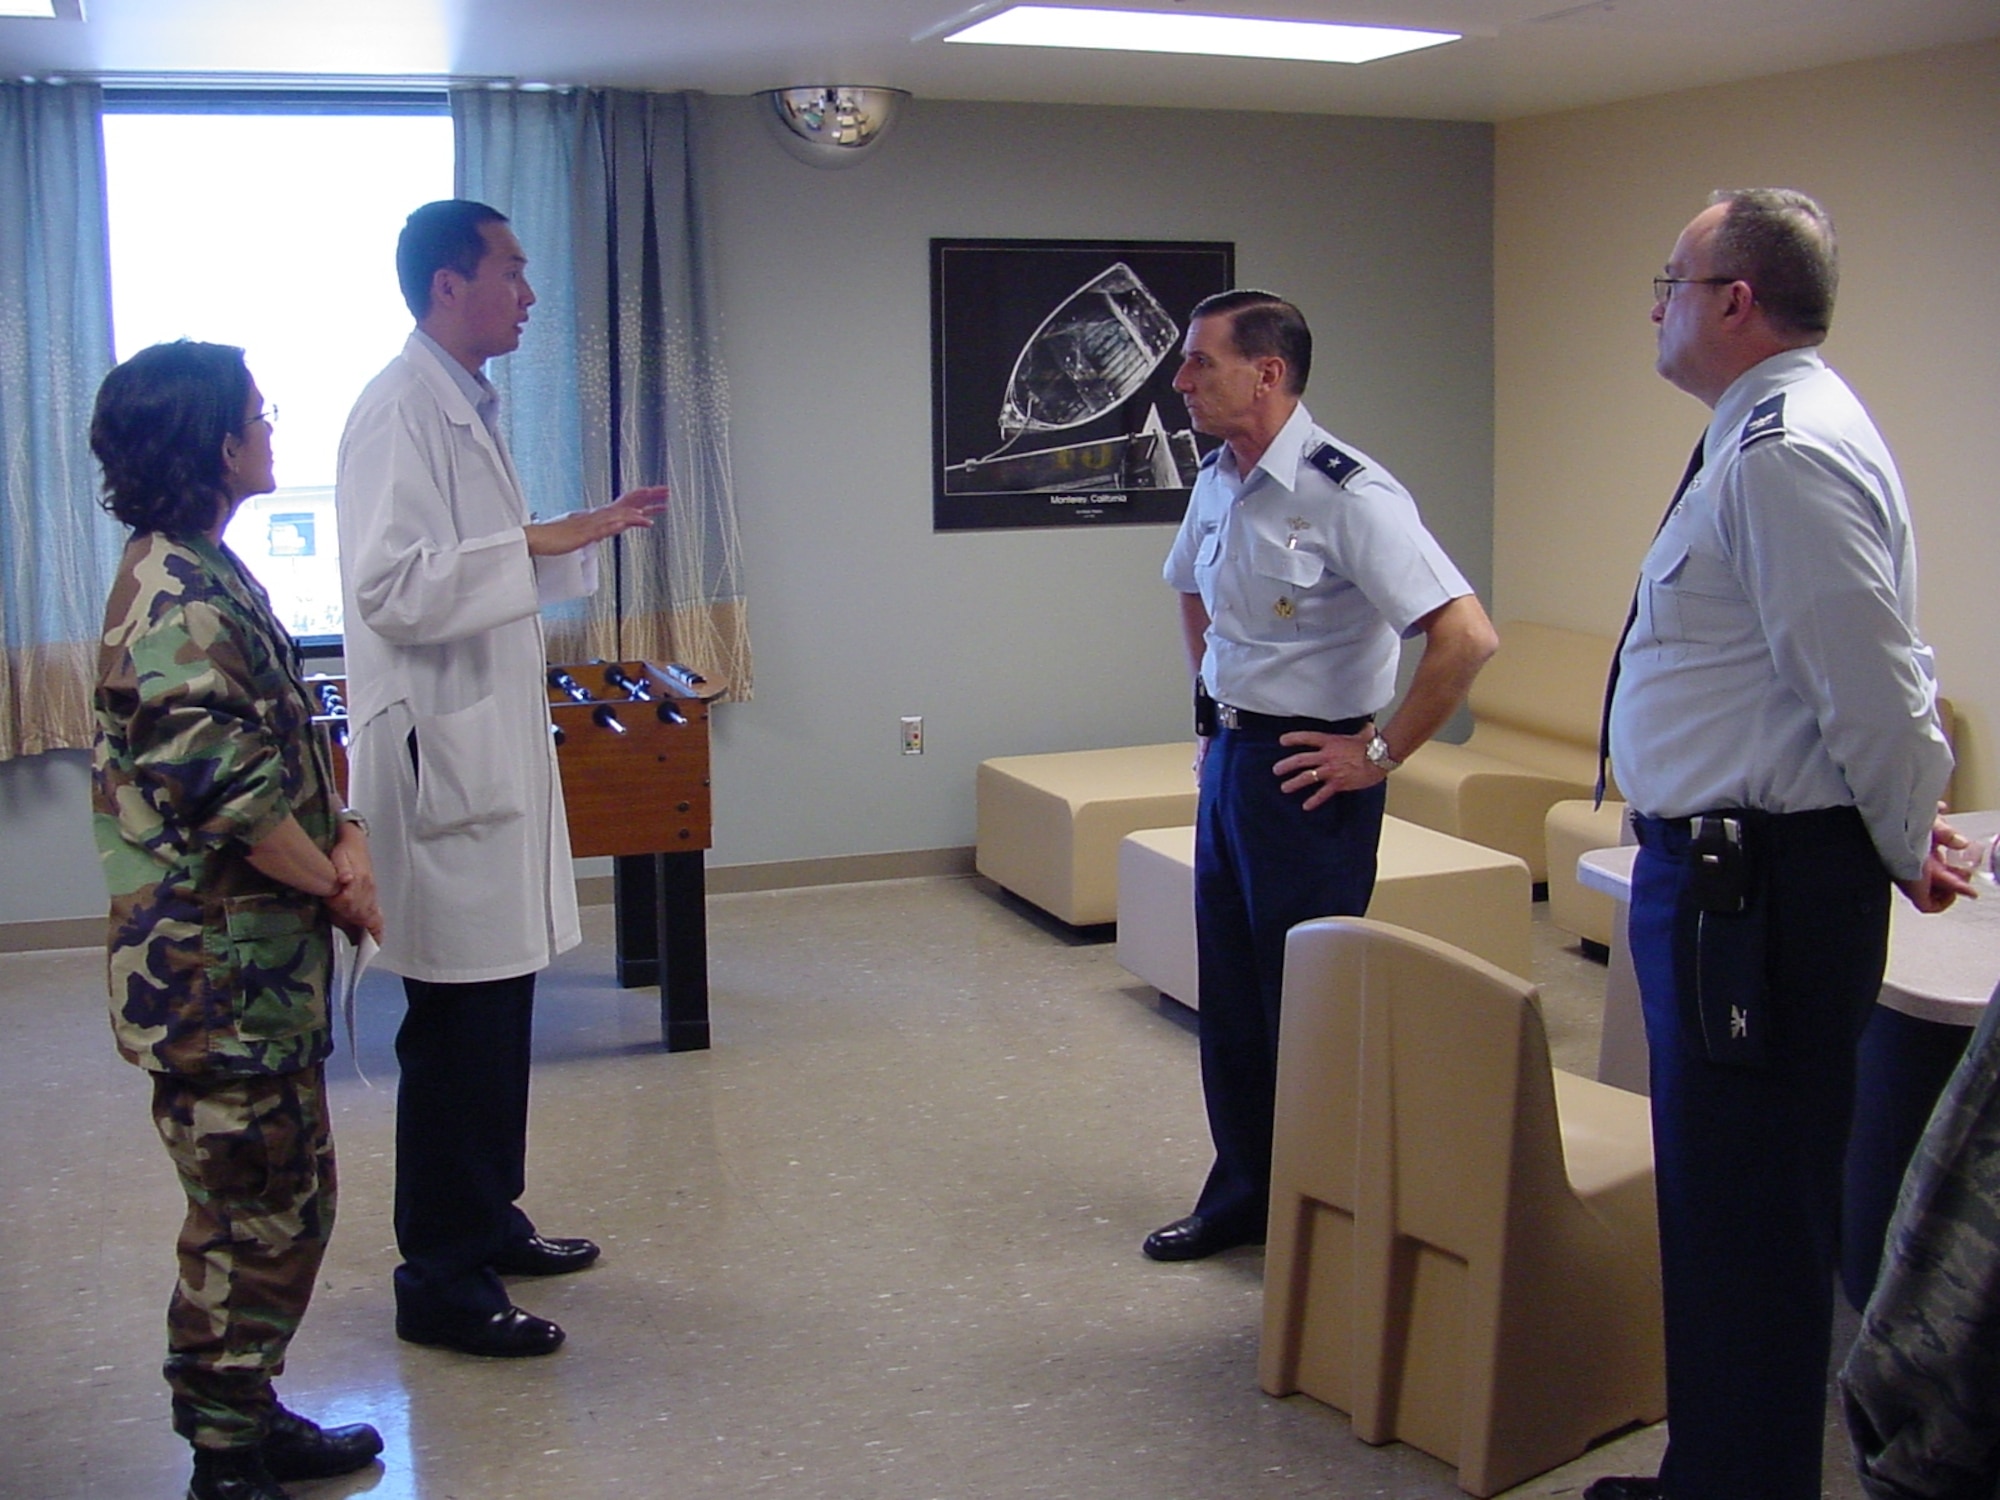 Maj. (Dr.) Vu Le, 60th Medical Operations Squadron medical director of the Joint Inpatient Mental Health Unit and Maj. Susan Von Eicken, 60th Inpatient Squadron nurse, brief Brig. Gen. (Dr.) Byron C. Hepburn, Air Force Medical Support Agency commander and Col. (Dr.) Lee E. Payne,  60th Medical Group commander on the new DoD/VA Joint Inpatient Mental Health Unit at David Grant USAF Medical Center.  General Hepburn, a former 60th Medical Group commander, has recently been selected to be deputy Surgeon General for the Air Force.  (U.S. Air Force photo / Jim Spellman)